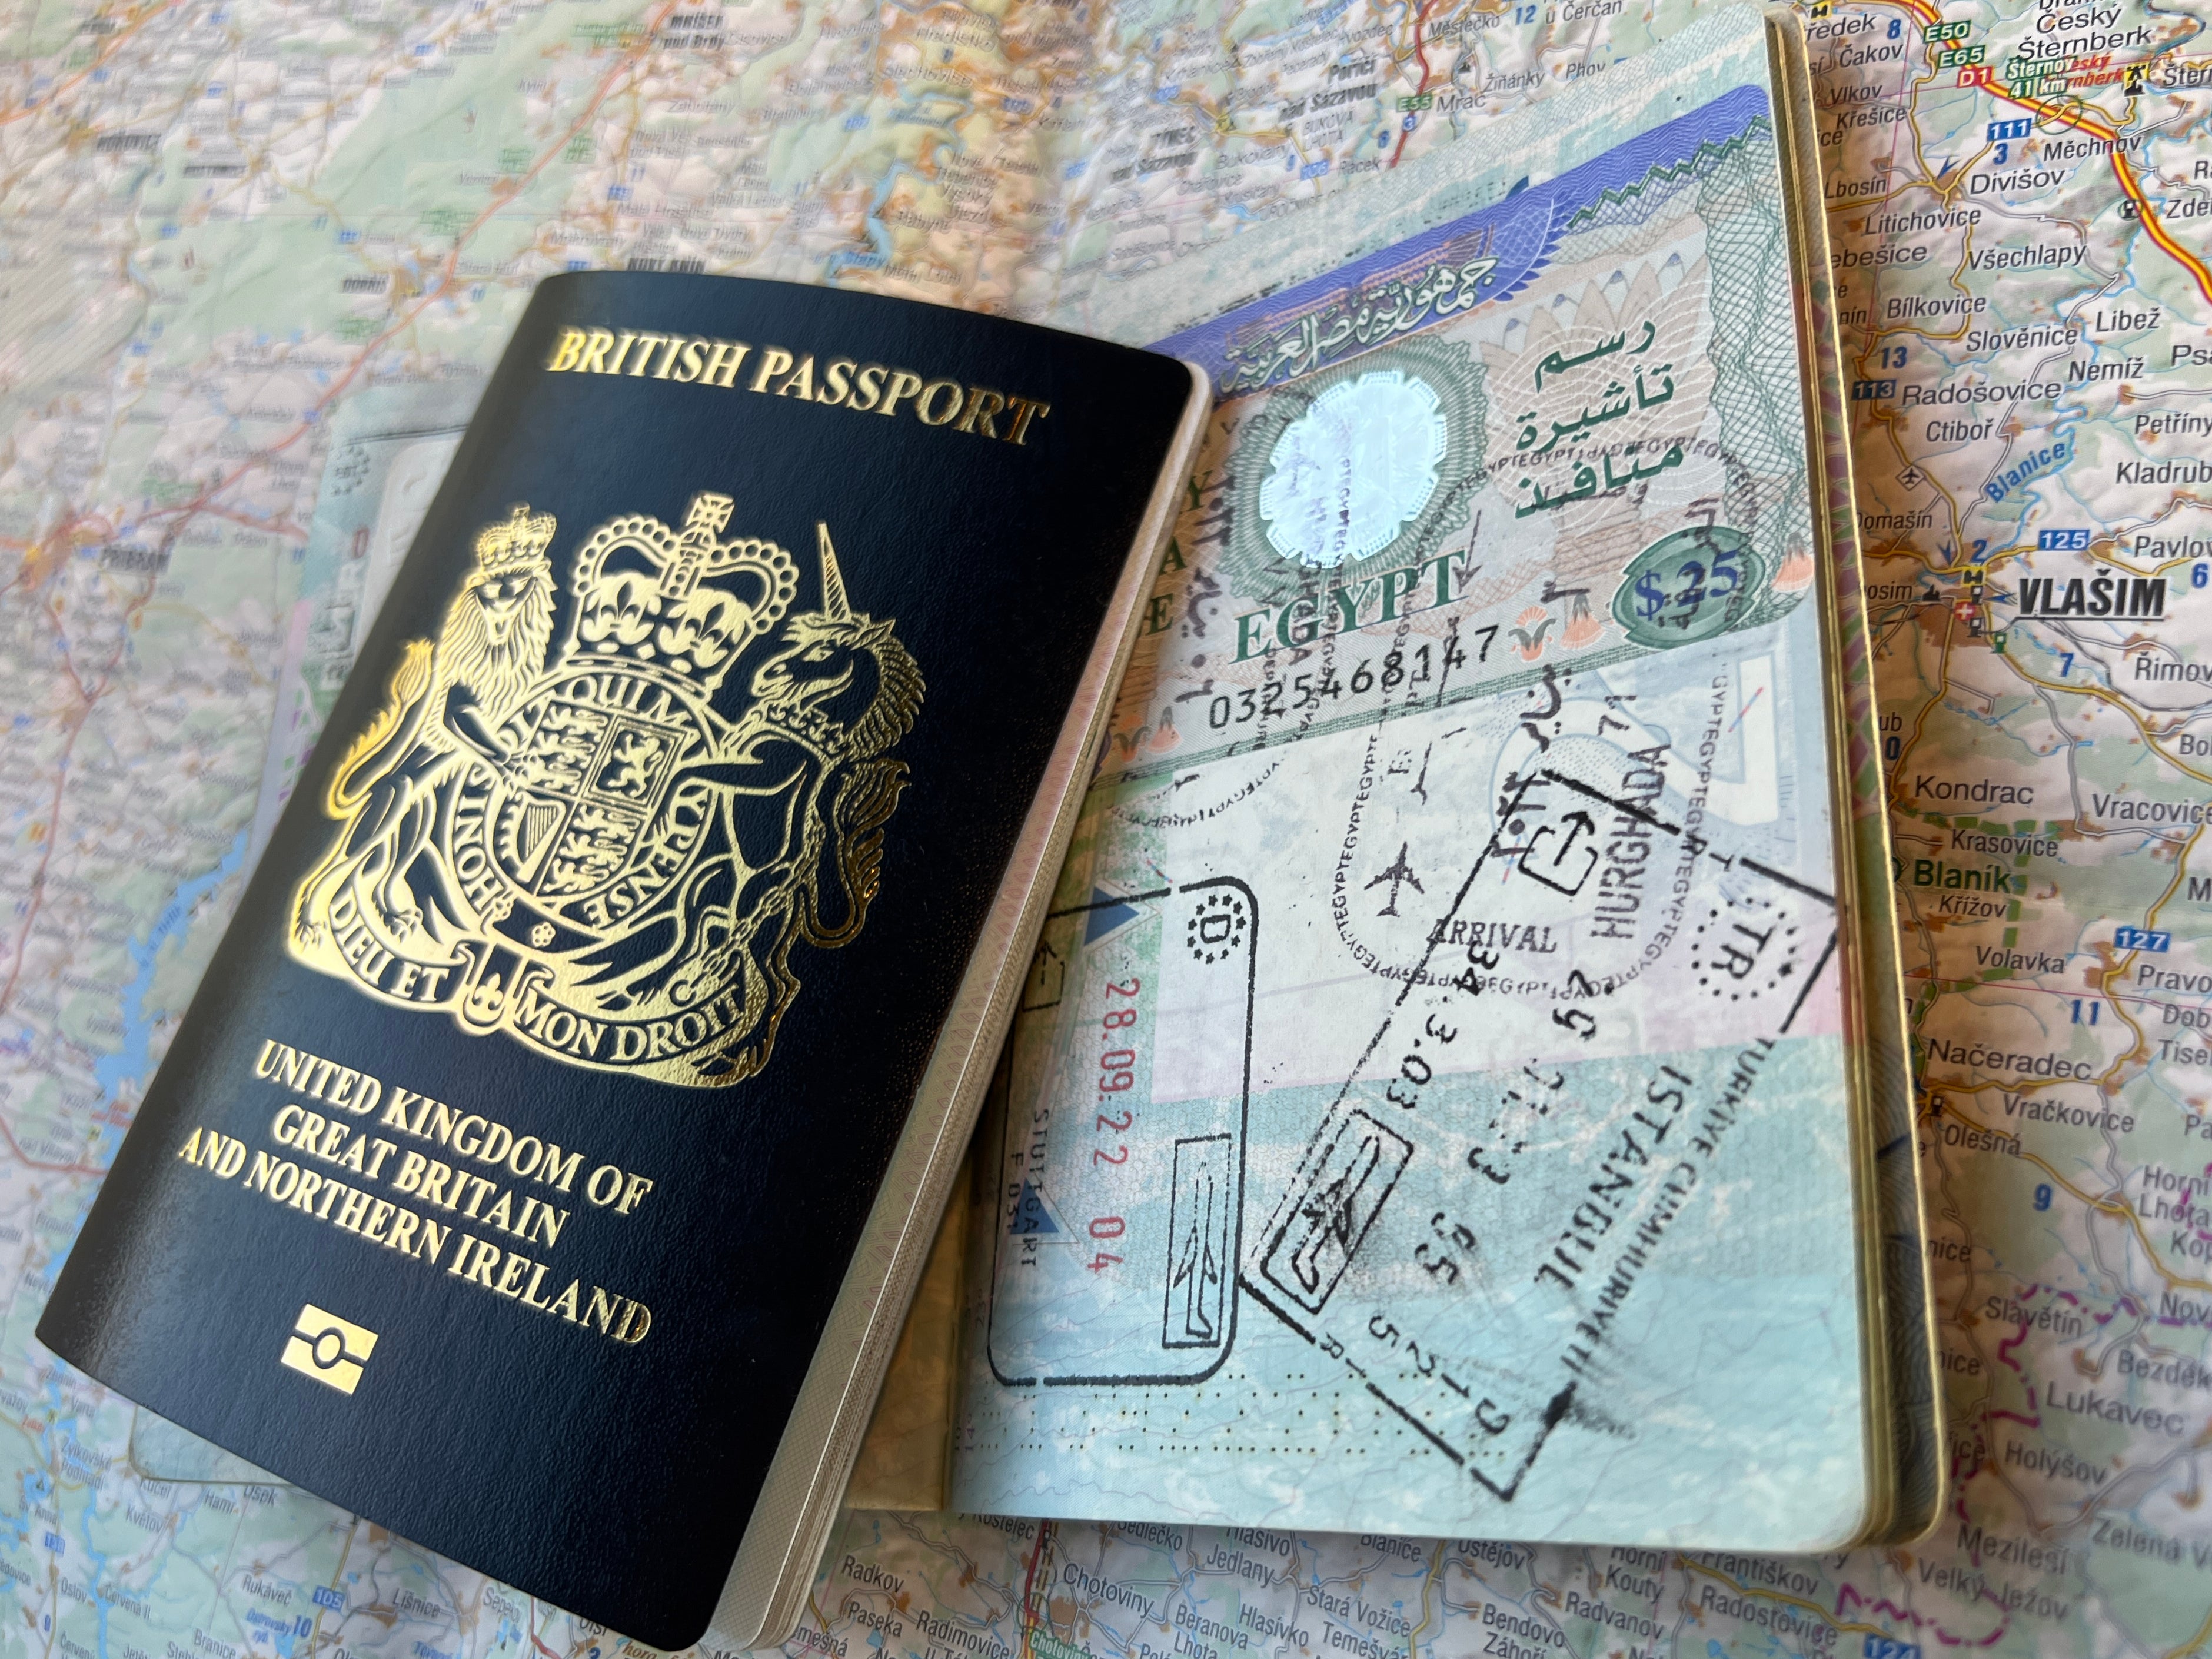 Dual documents: There are many good reasons for having two passports